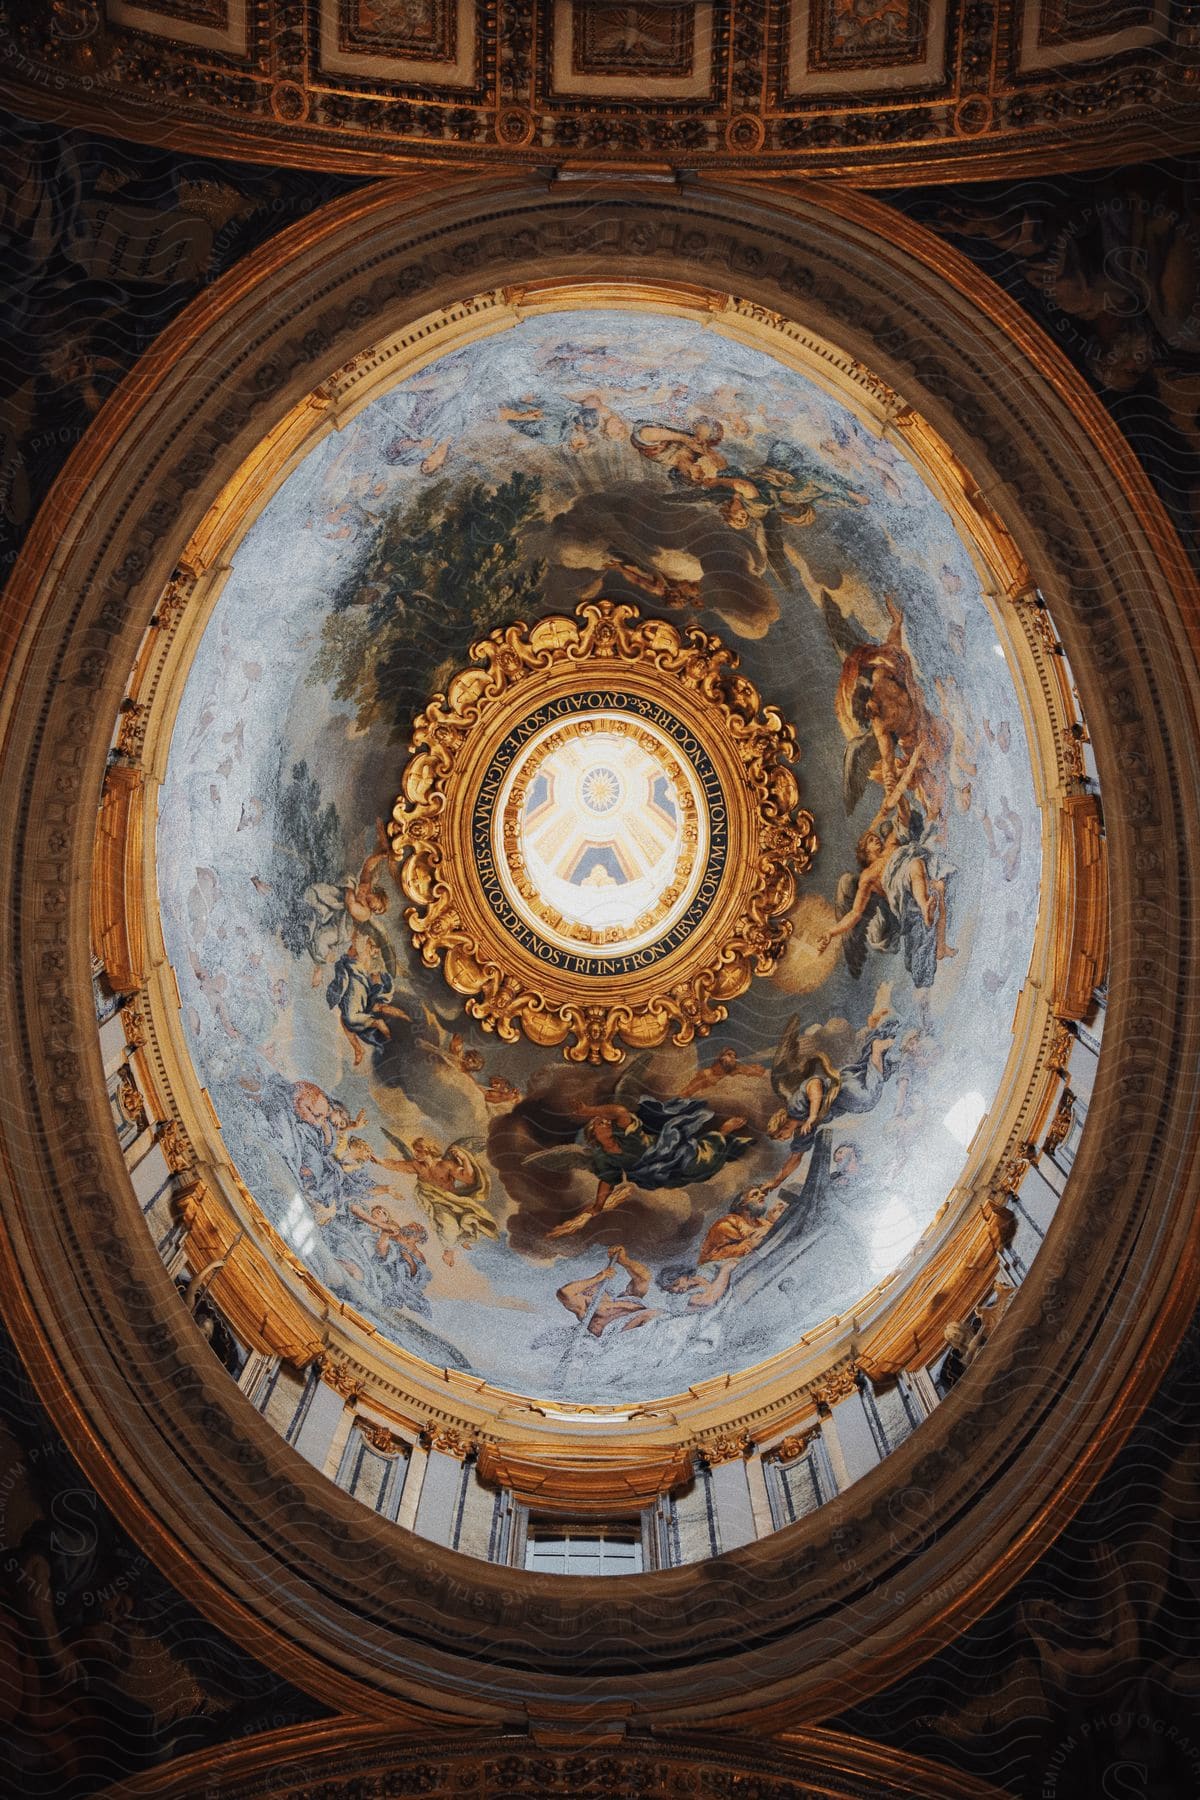 The painted dome of St. Peter's Basilica in Vatican City soars above a painted ceiling with a skylight.